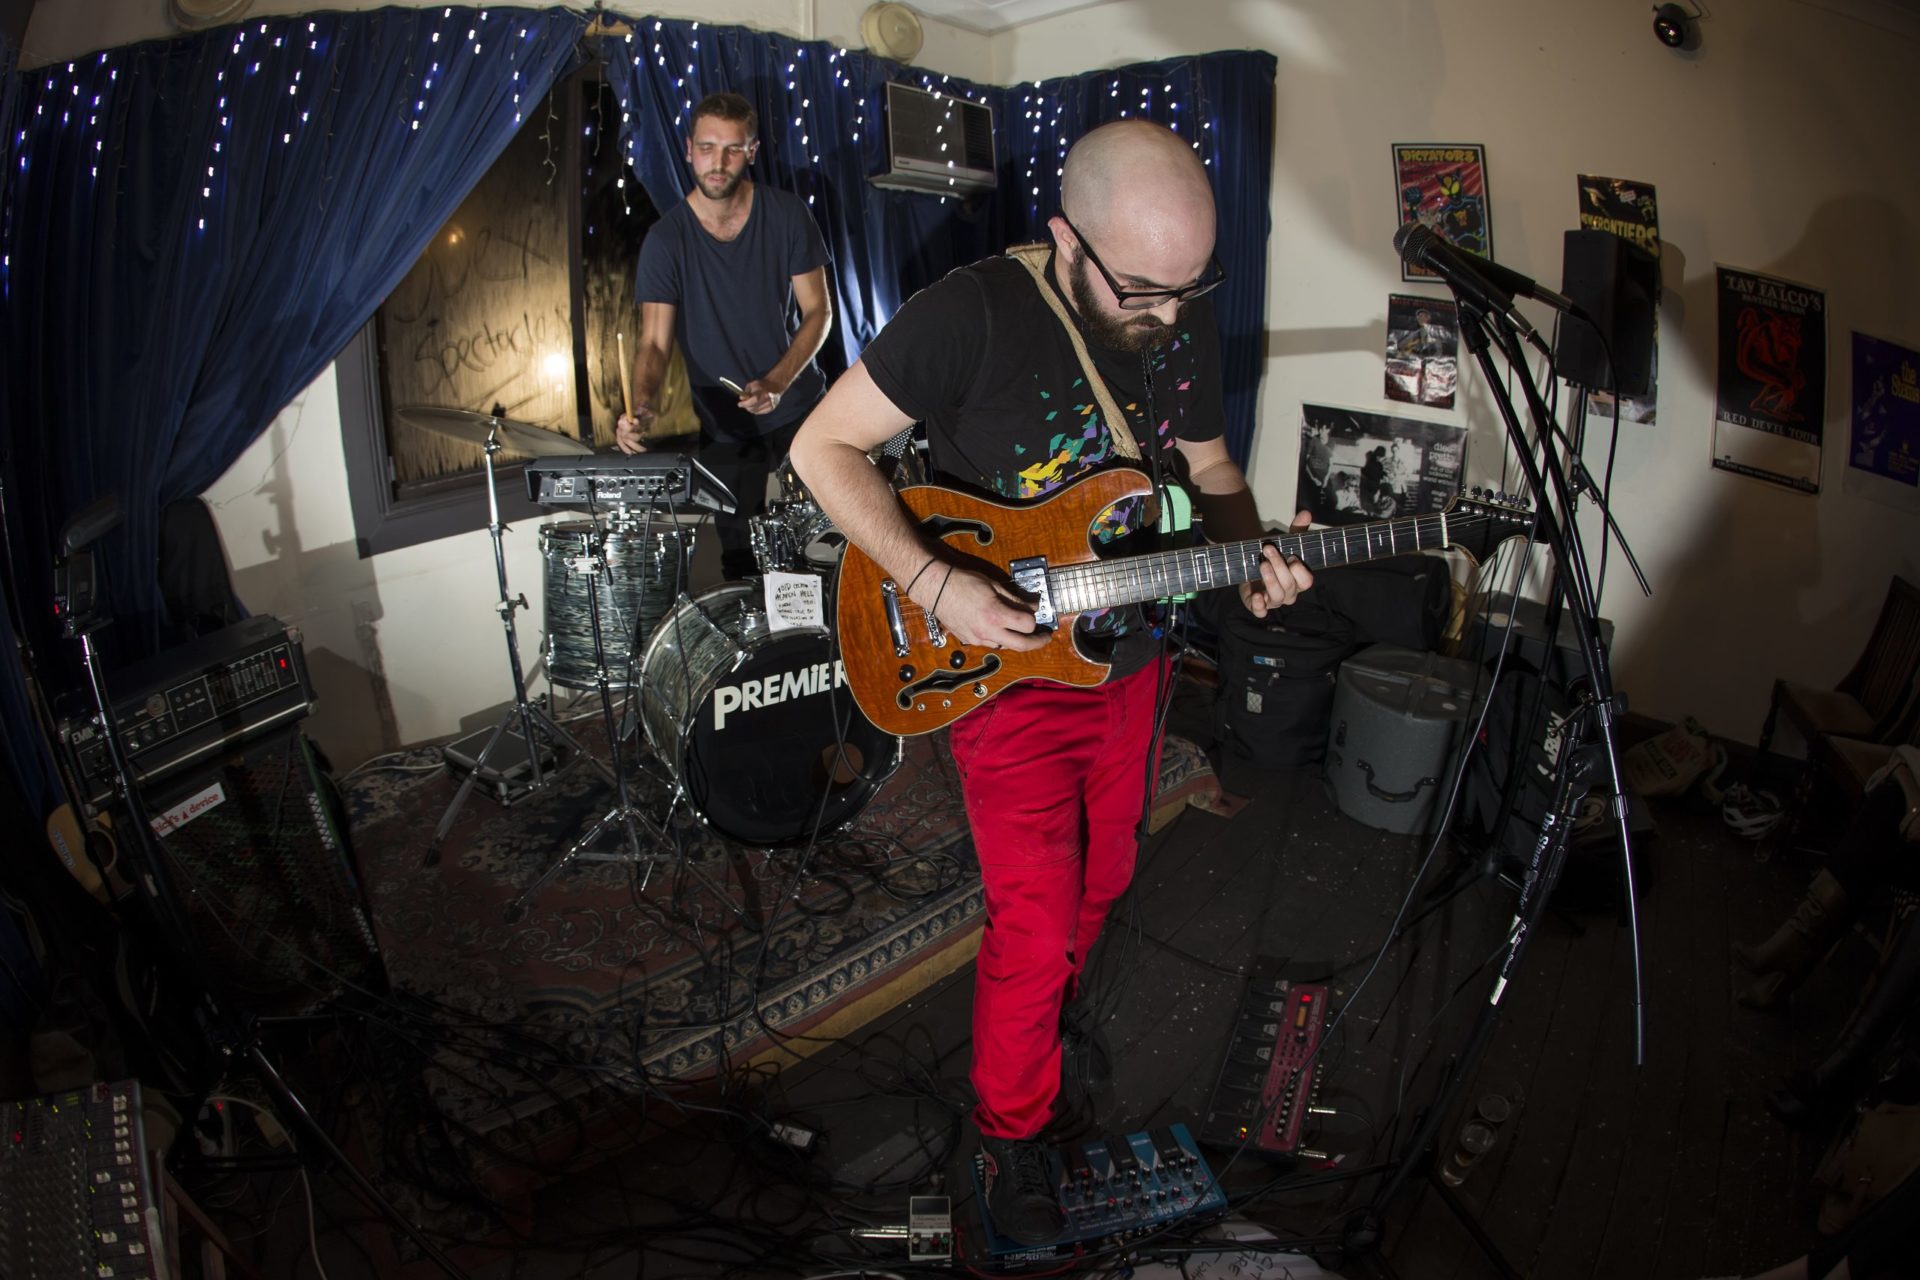 Spectacles @ The Record Crate, June ’14